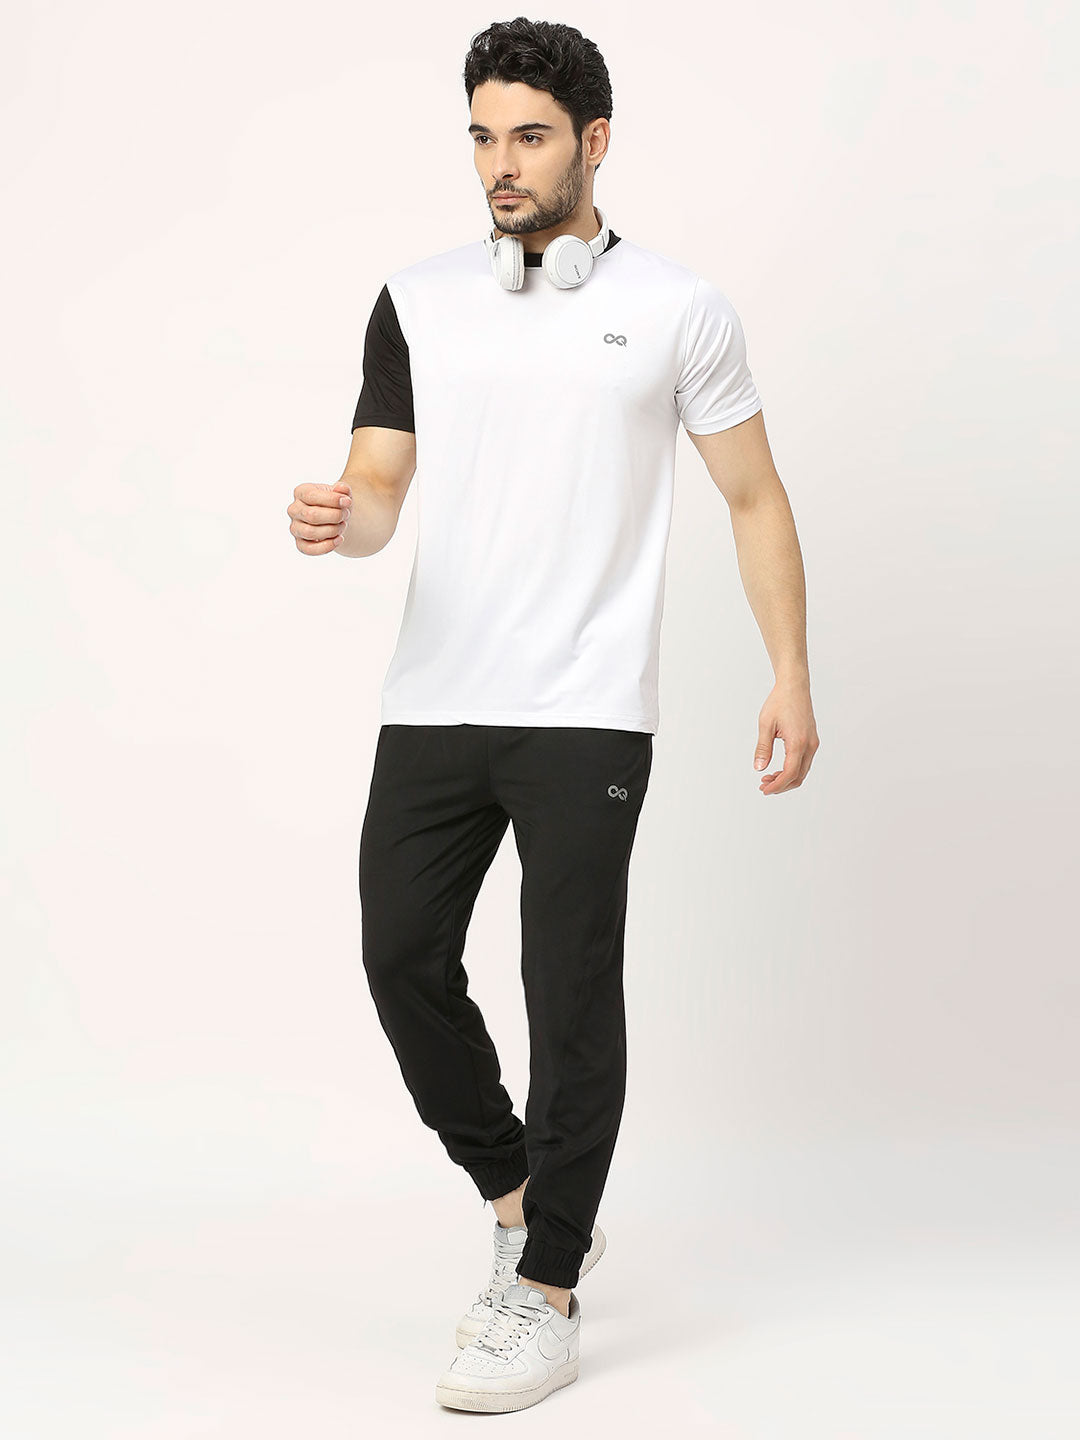 black and white with white shoes | White pants men, Black polo shirt men,  Black polo shirt